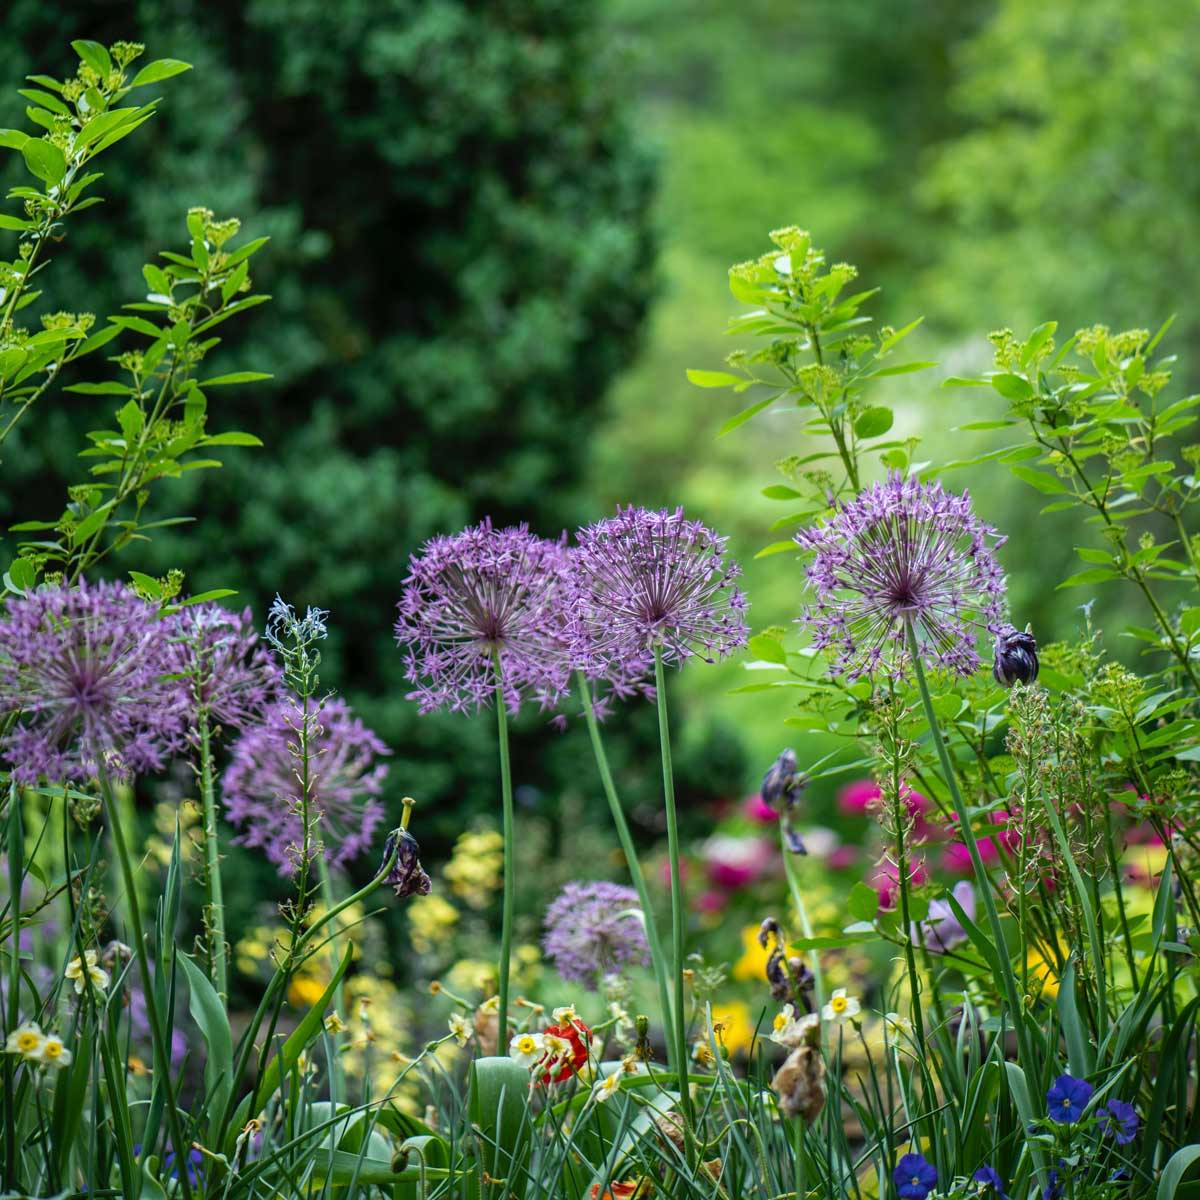 A lush garden with flowers in the foreground and trees in the background